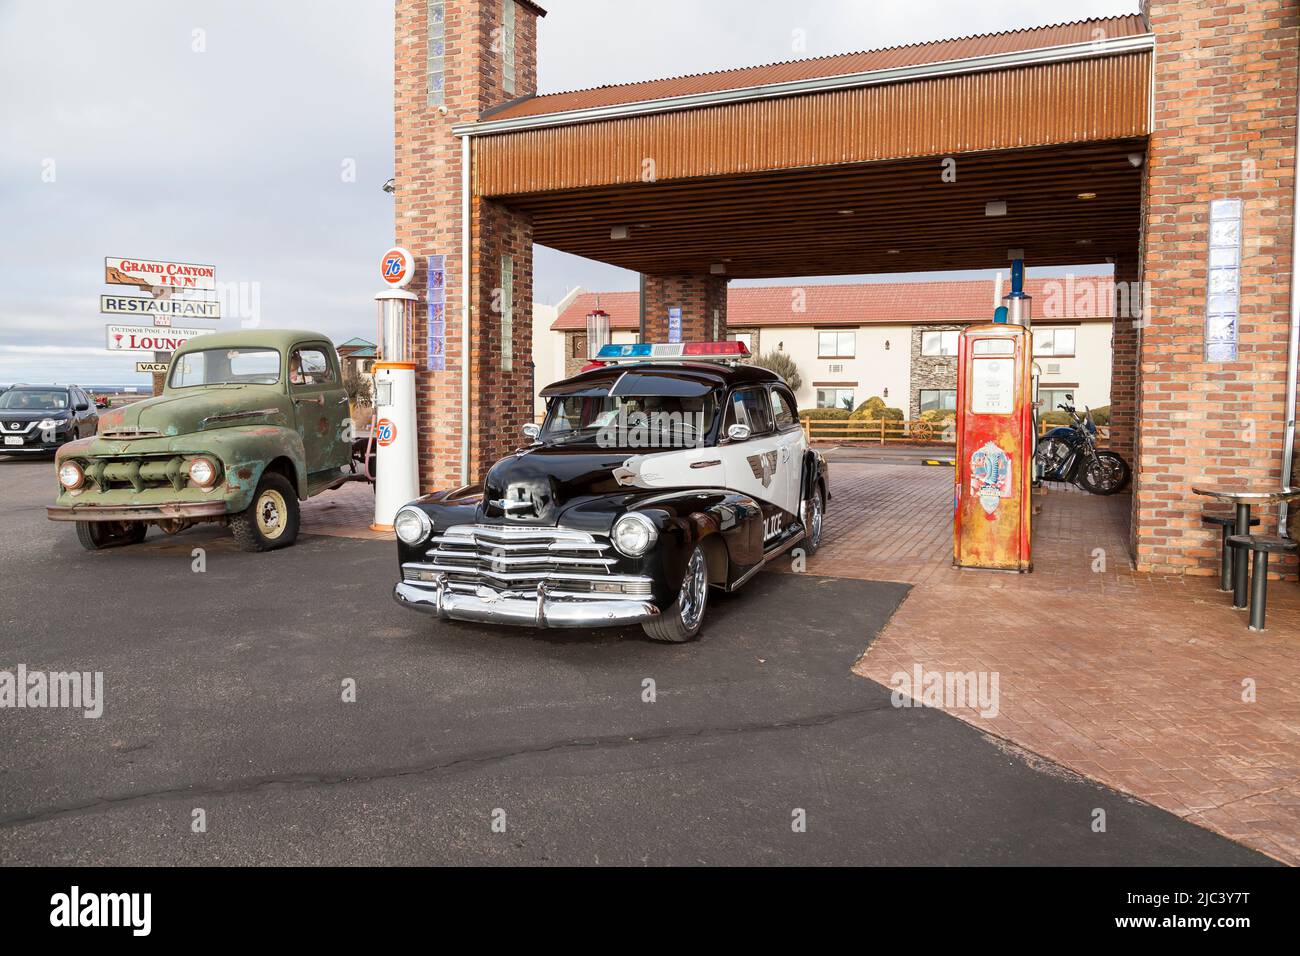 1948 classic Chevrolet police car and a vintage Chevrolet truck displayed at a historic gas station in Valle, Arizona. USA Stock Photo